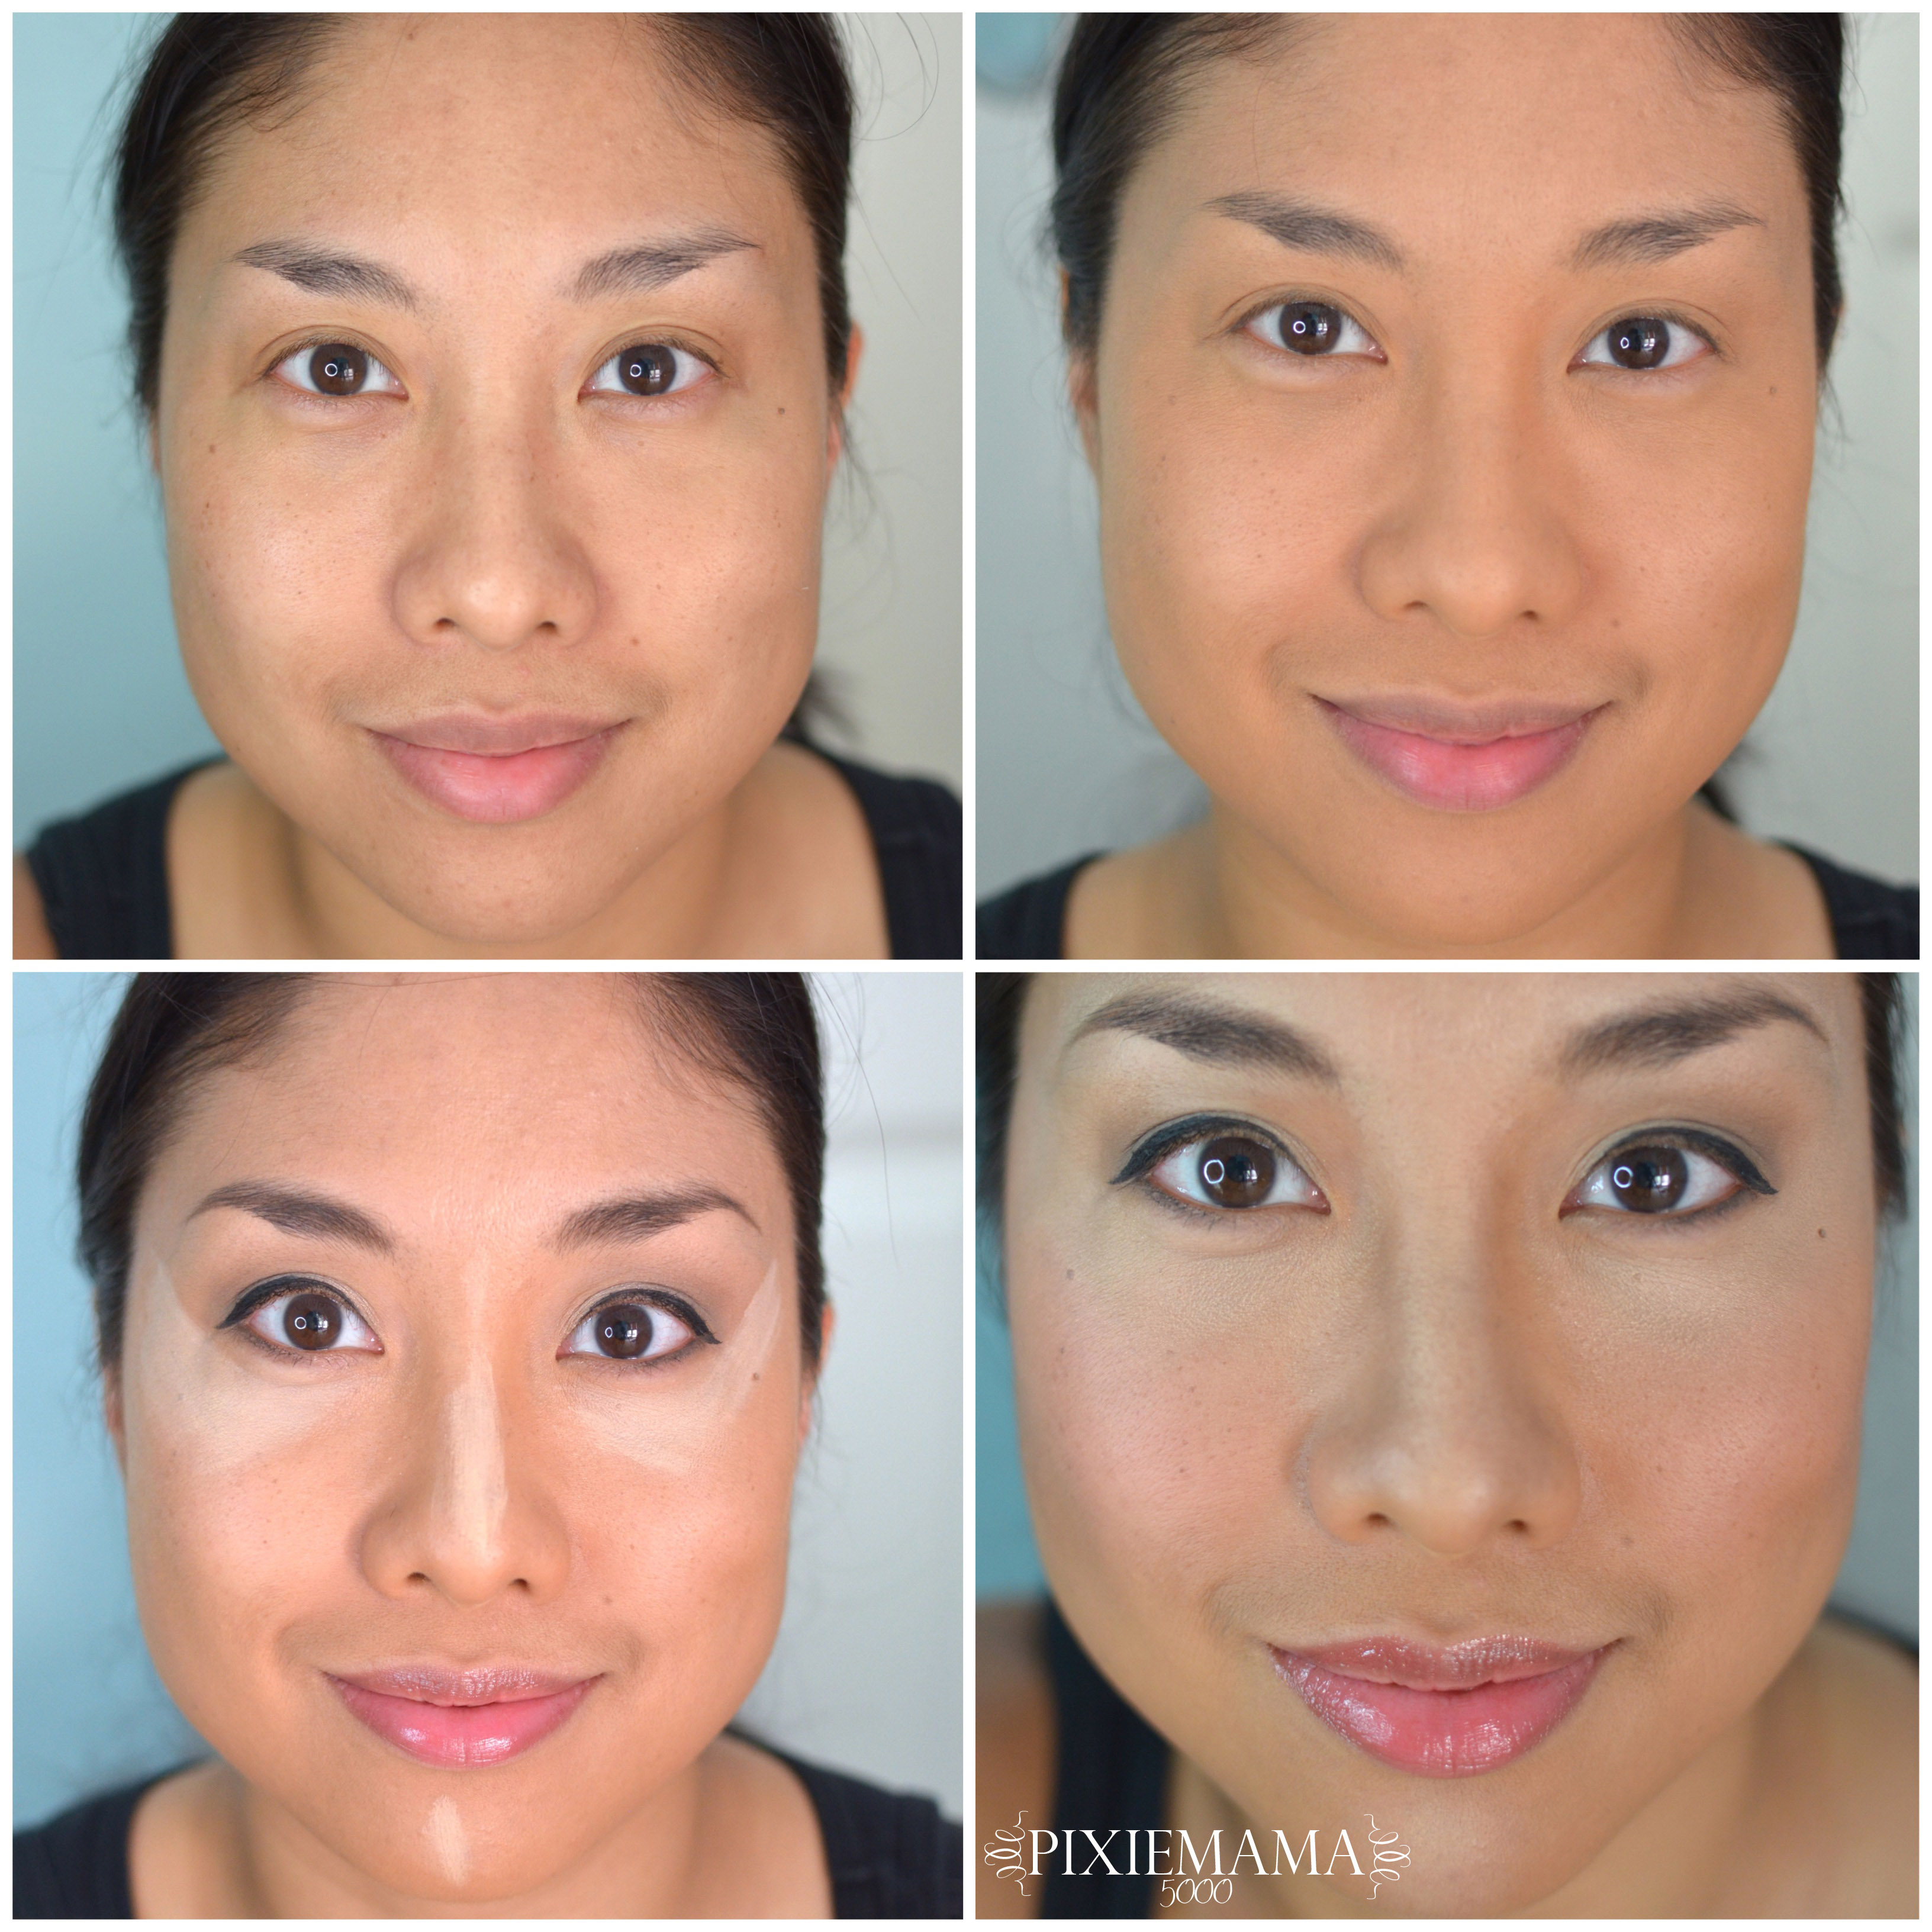 Highlighting and Contouring for an Everyday Look! – Pixiemama